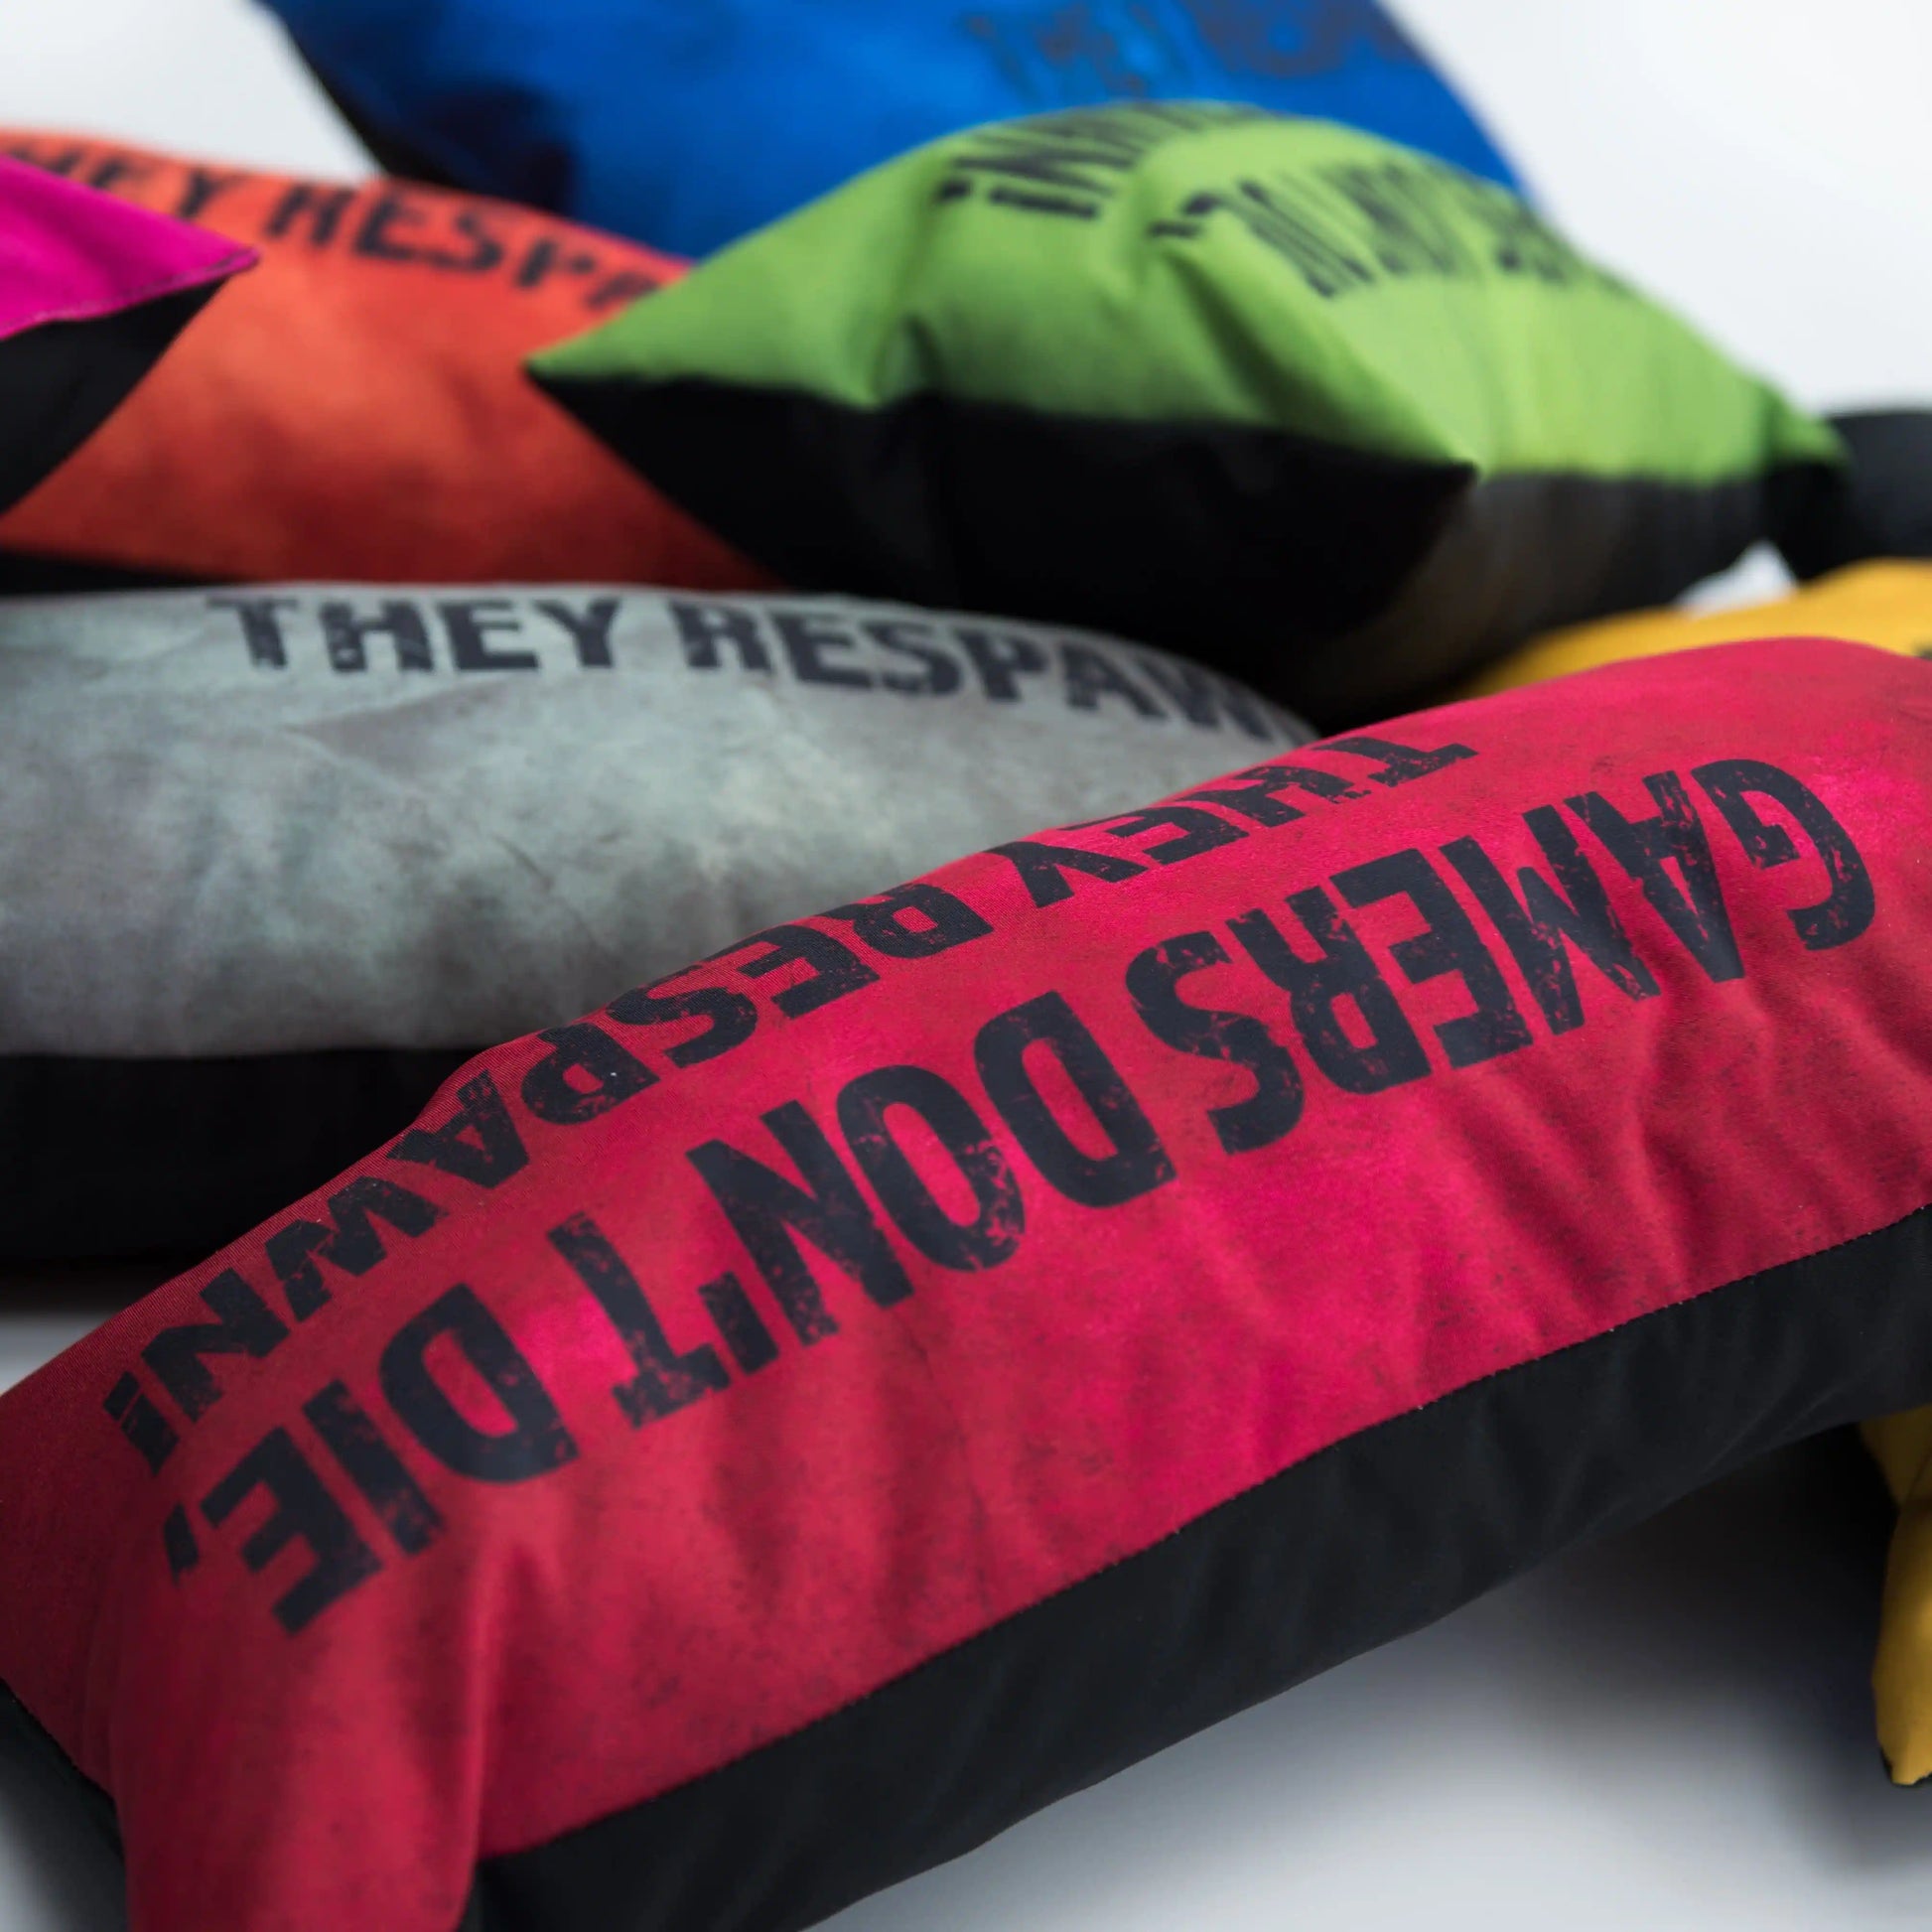 A stack of colorful pillows with the words "GAMERS DON'T DIE THEY RESPAWN" on them.